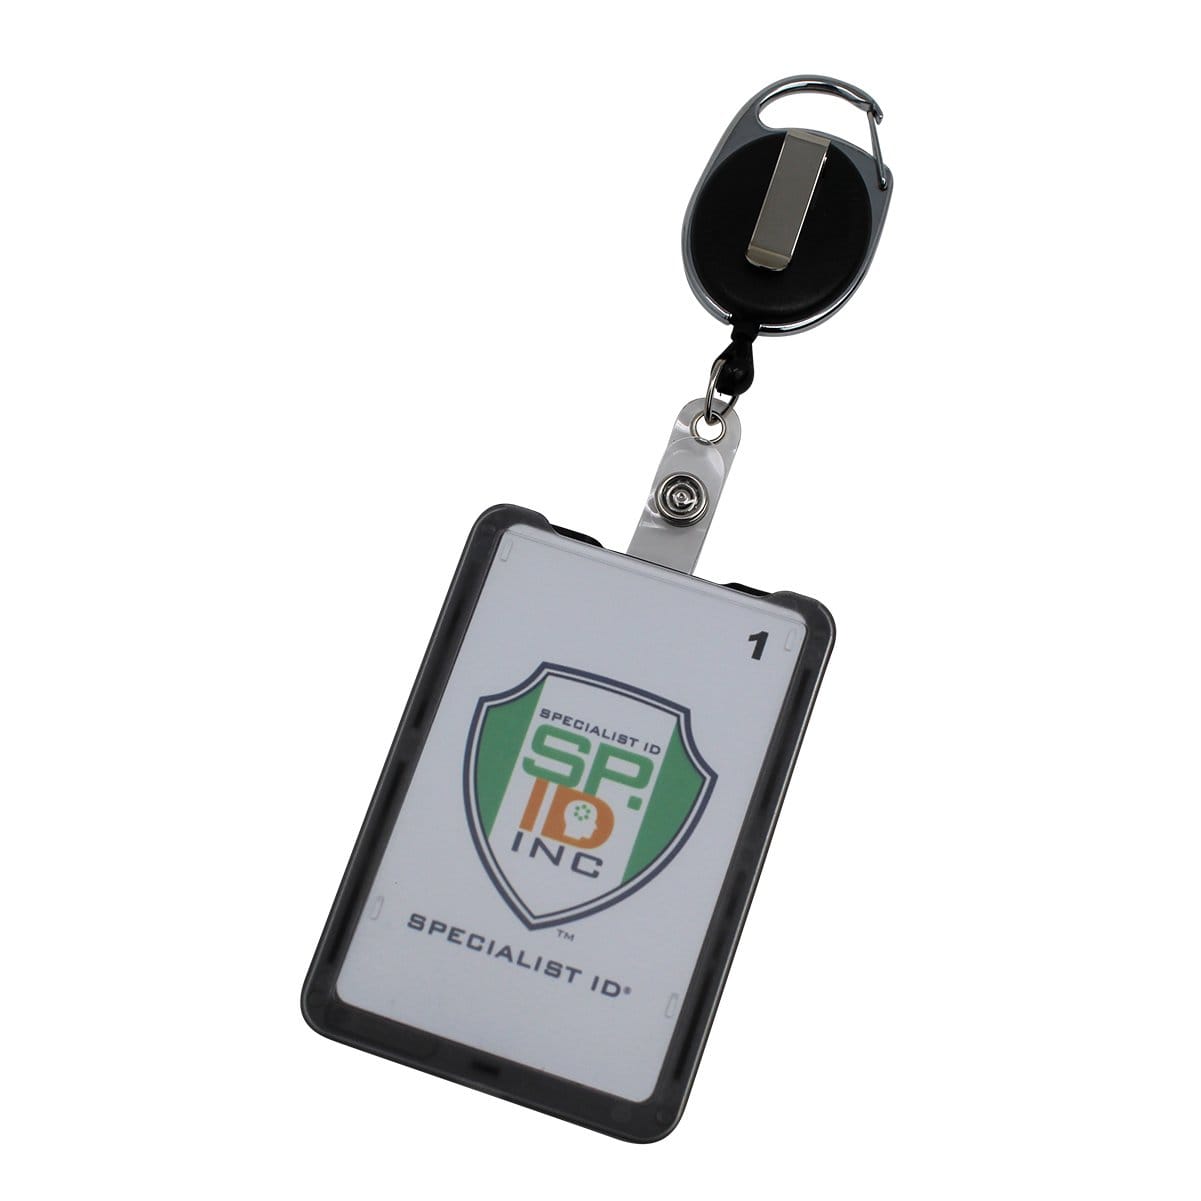 Hard Plastic 3 Card Badge Holder with Retractable Reel